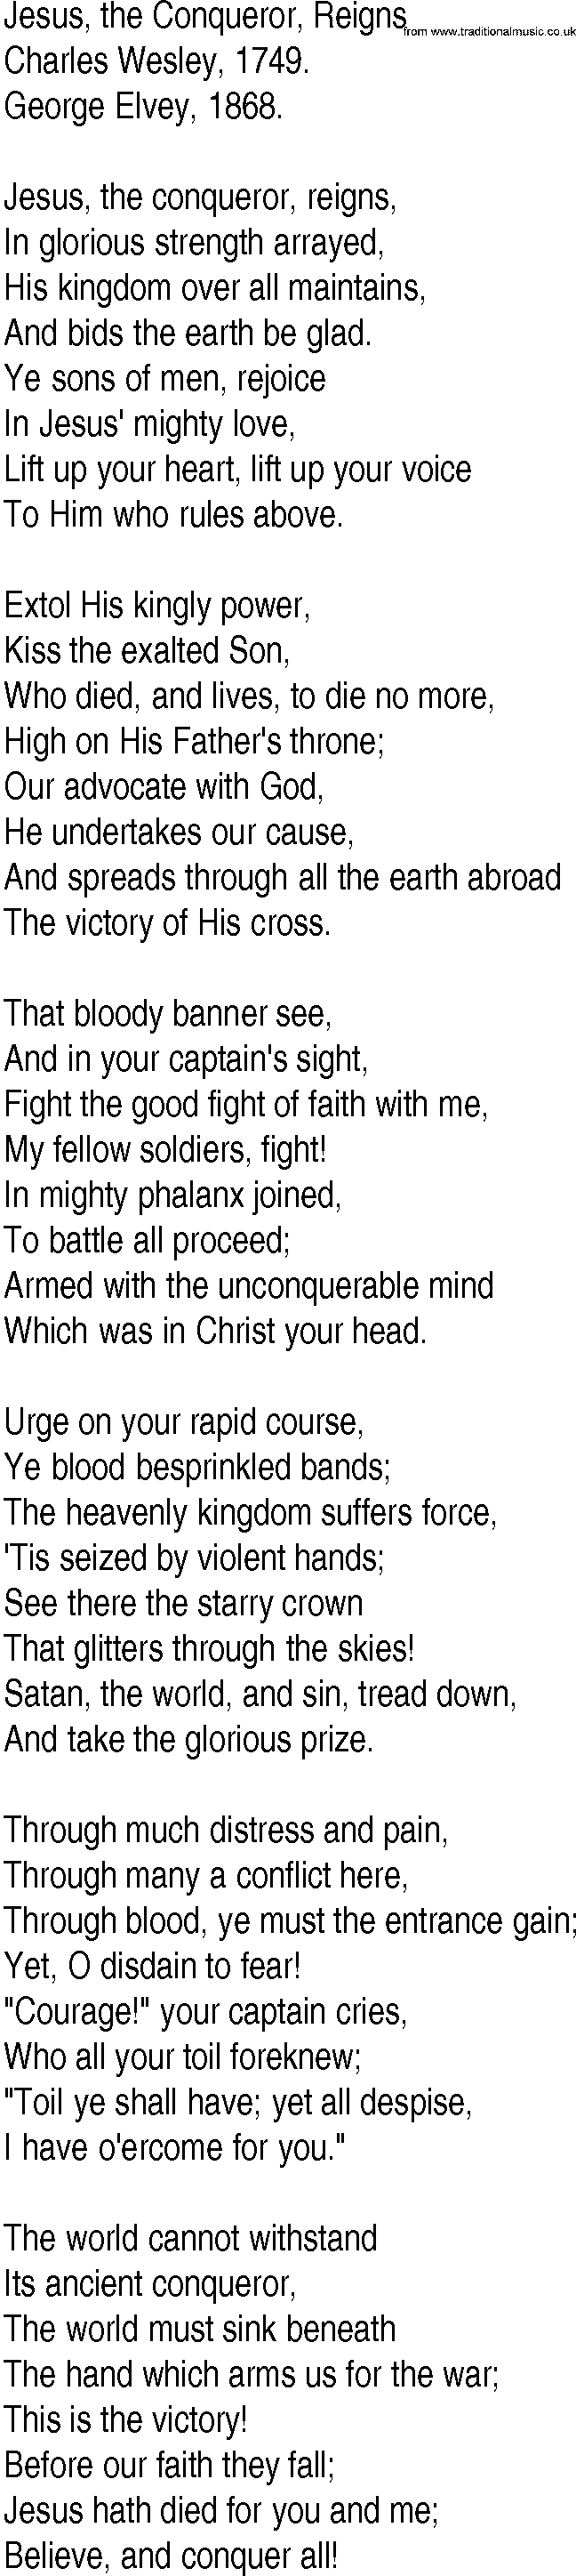 Hymn and Gospel Song: Jesus, the Conqueror, Reigns by Charles Wesley lyrics